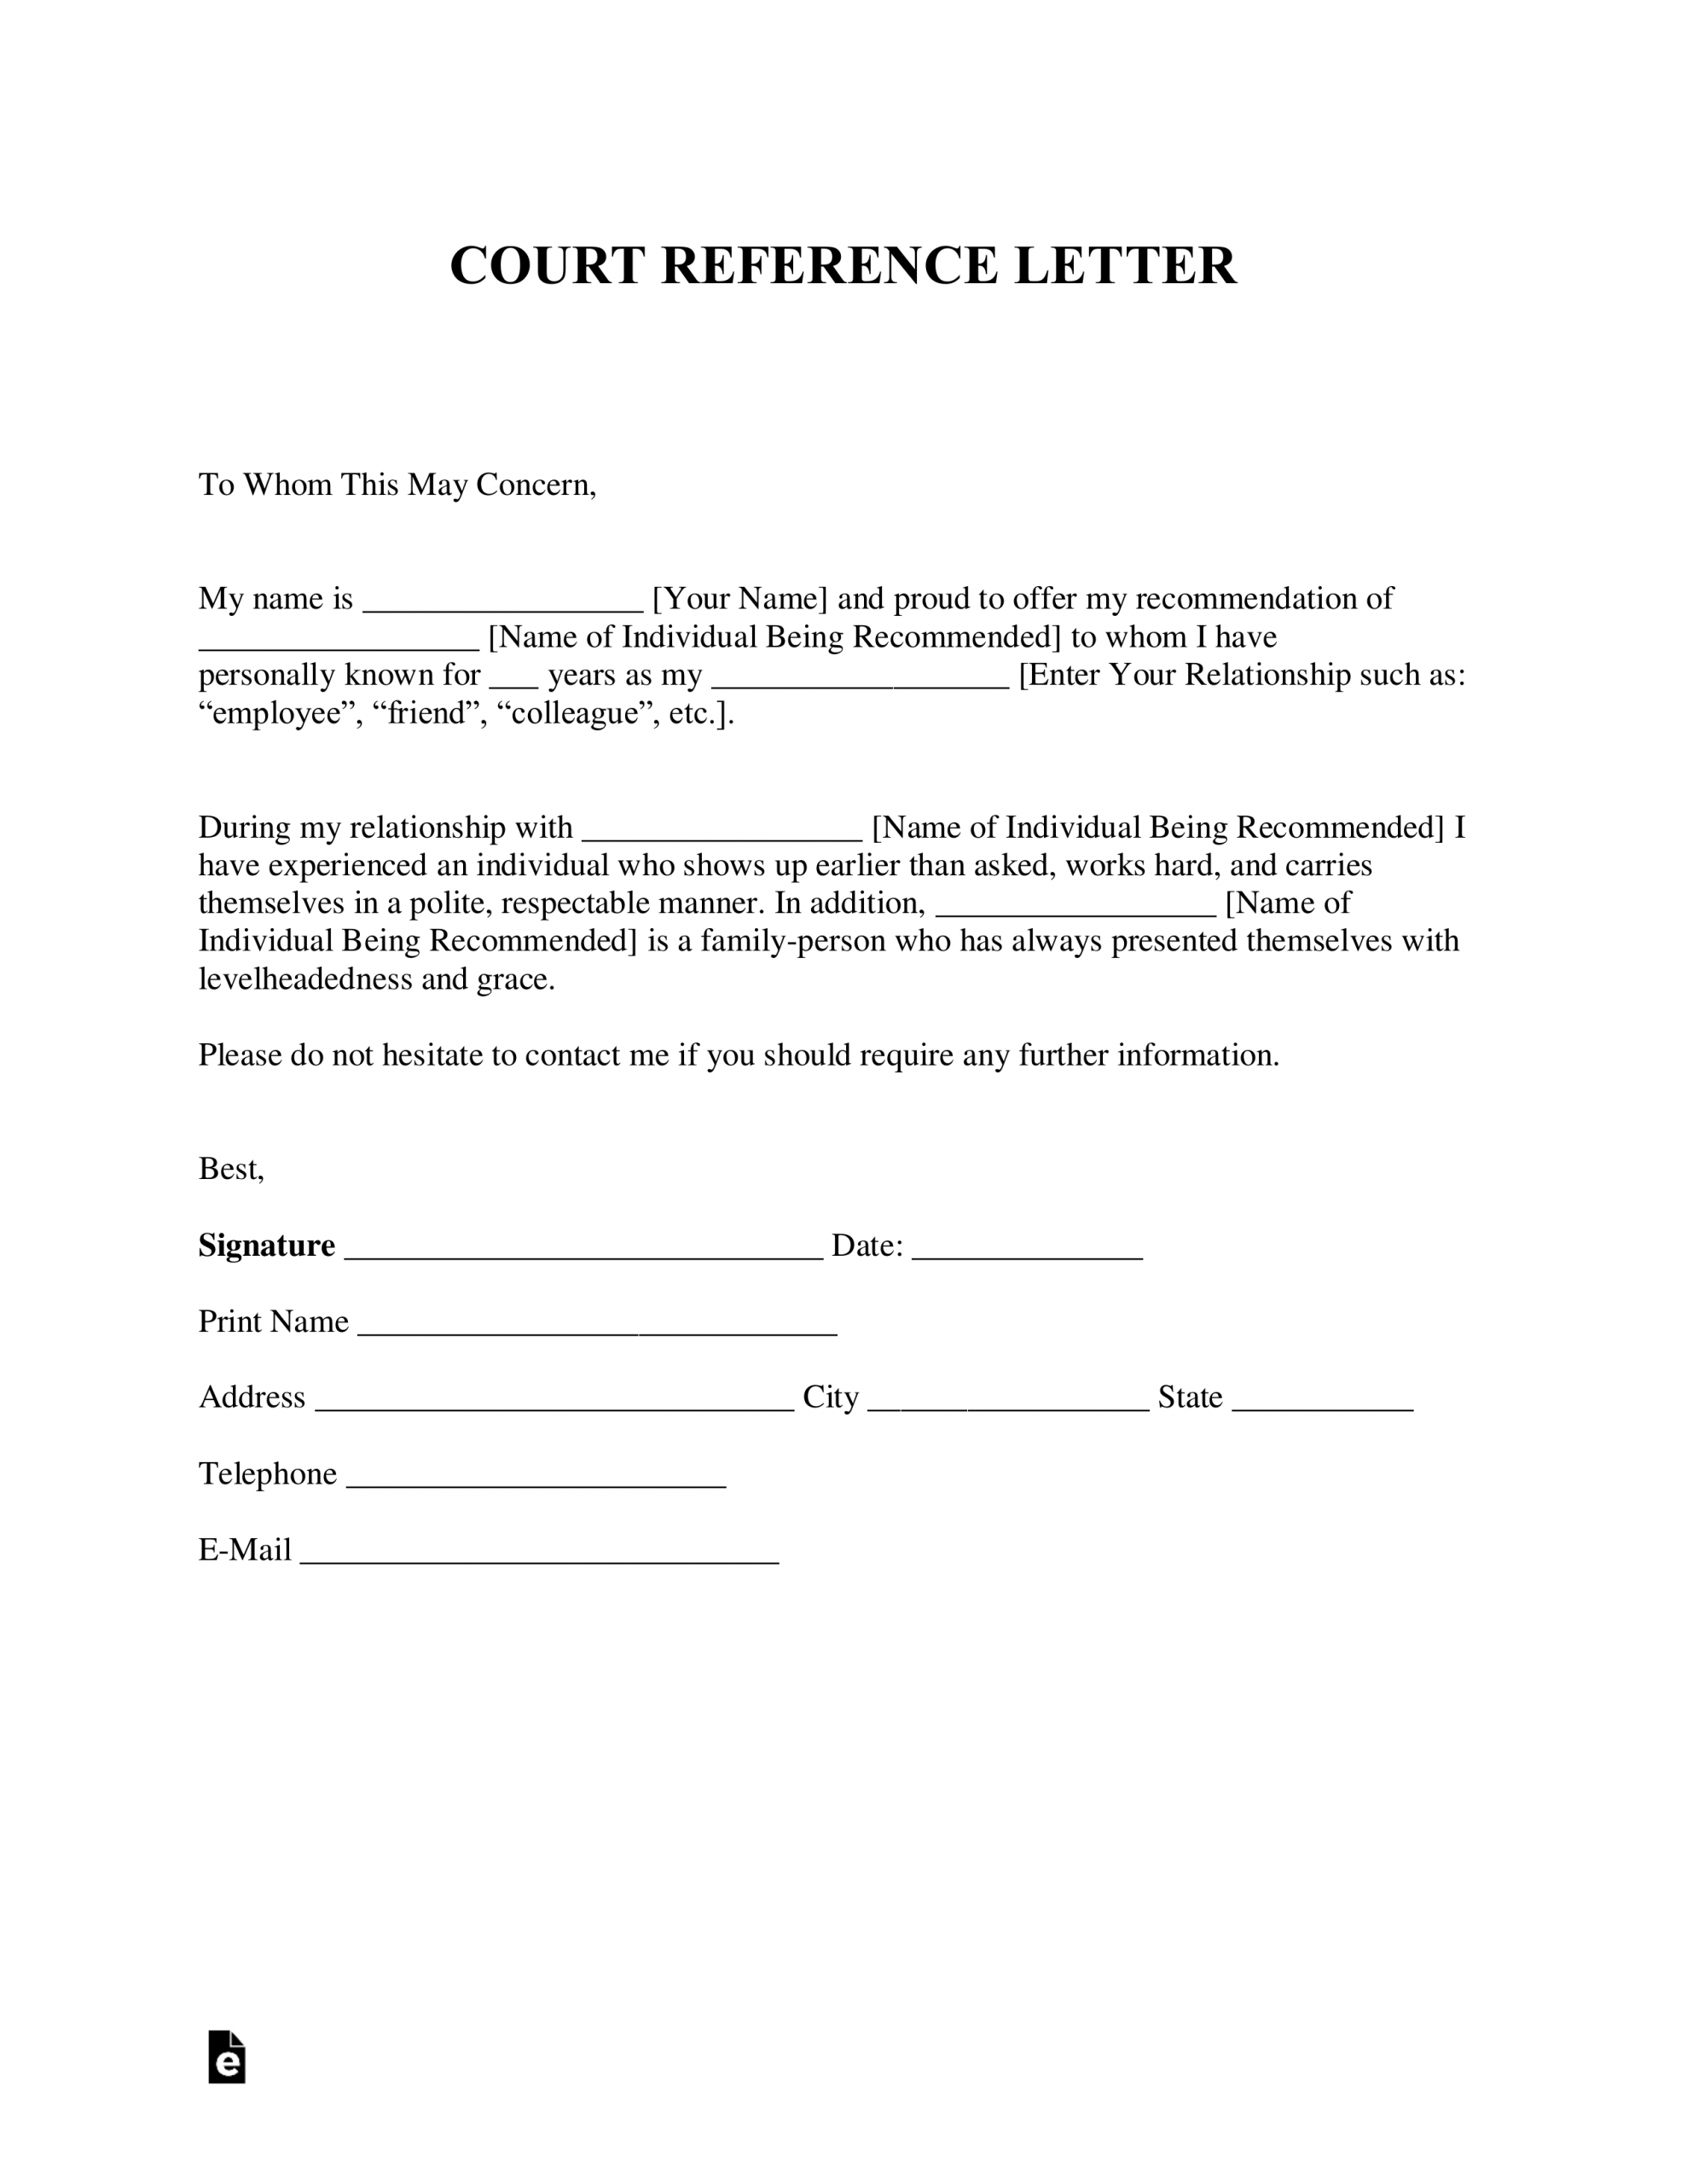 Letter Of Recommendation For Court Debandje within dimensions 2550 X 3301